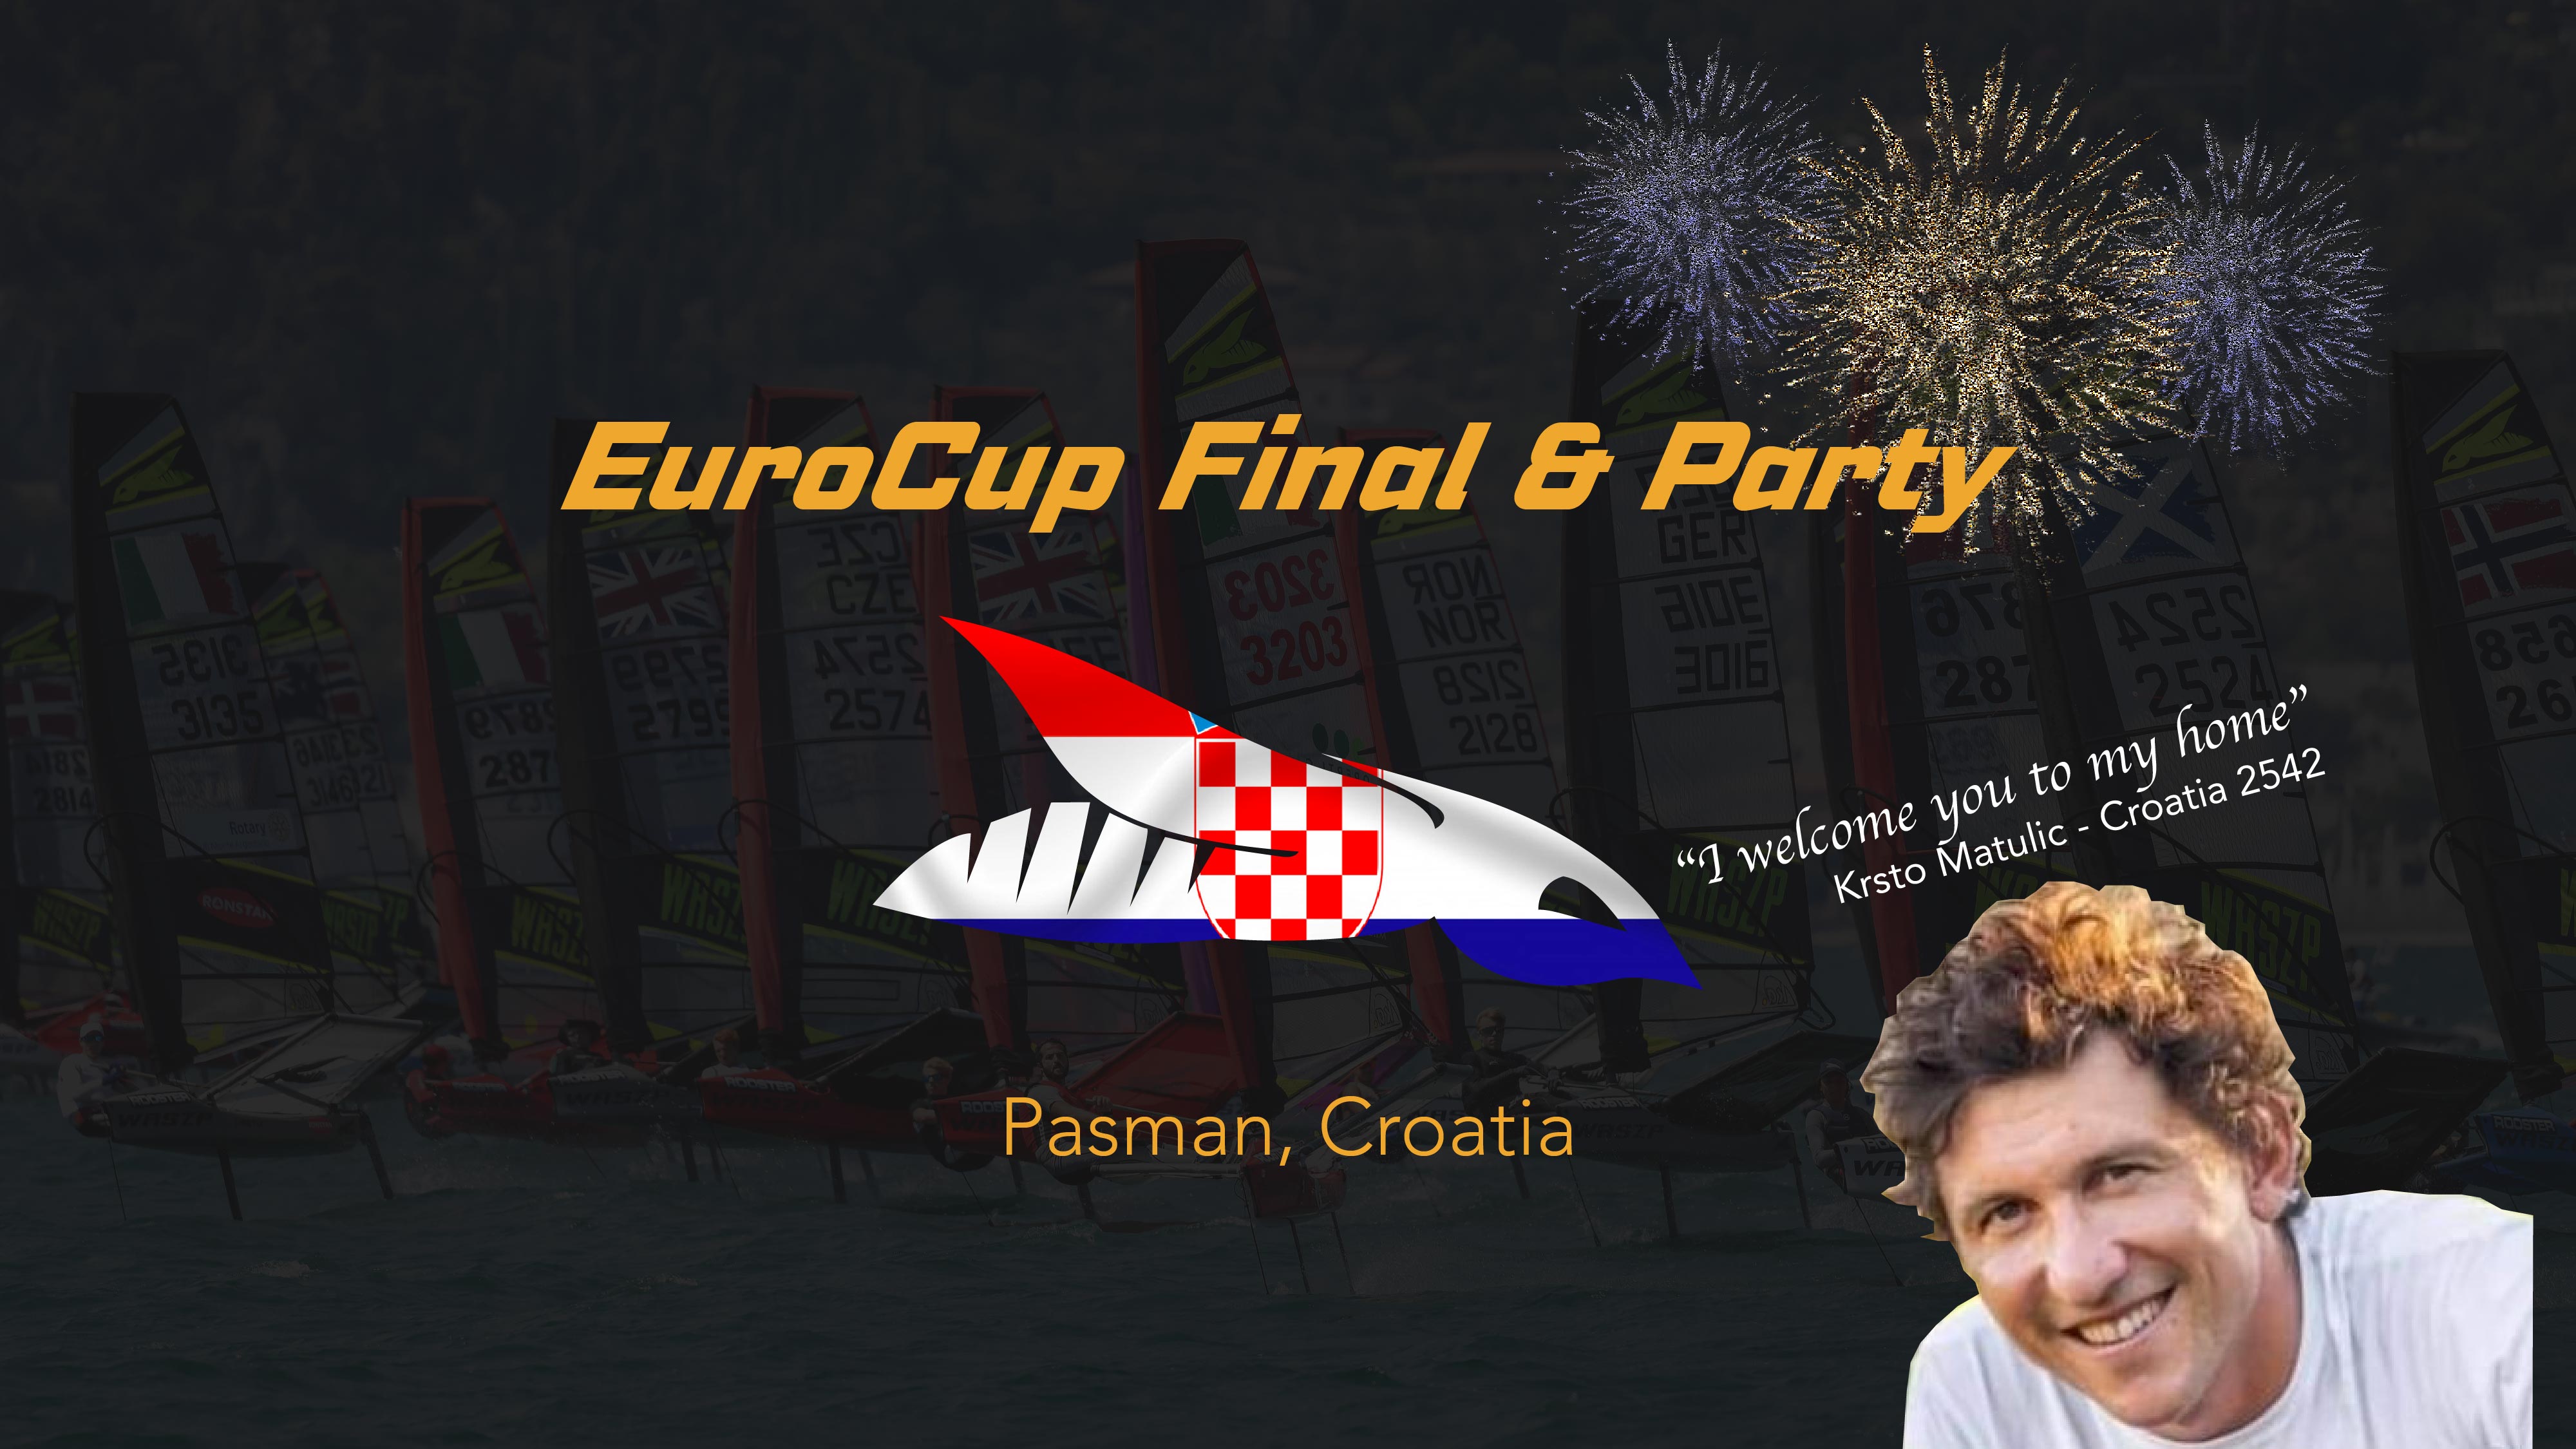 EuroCup Final and Party!